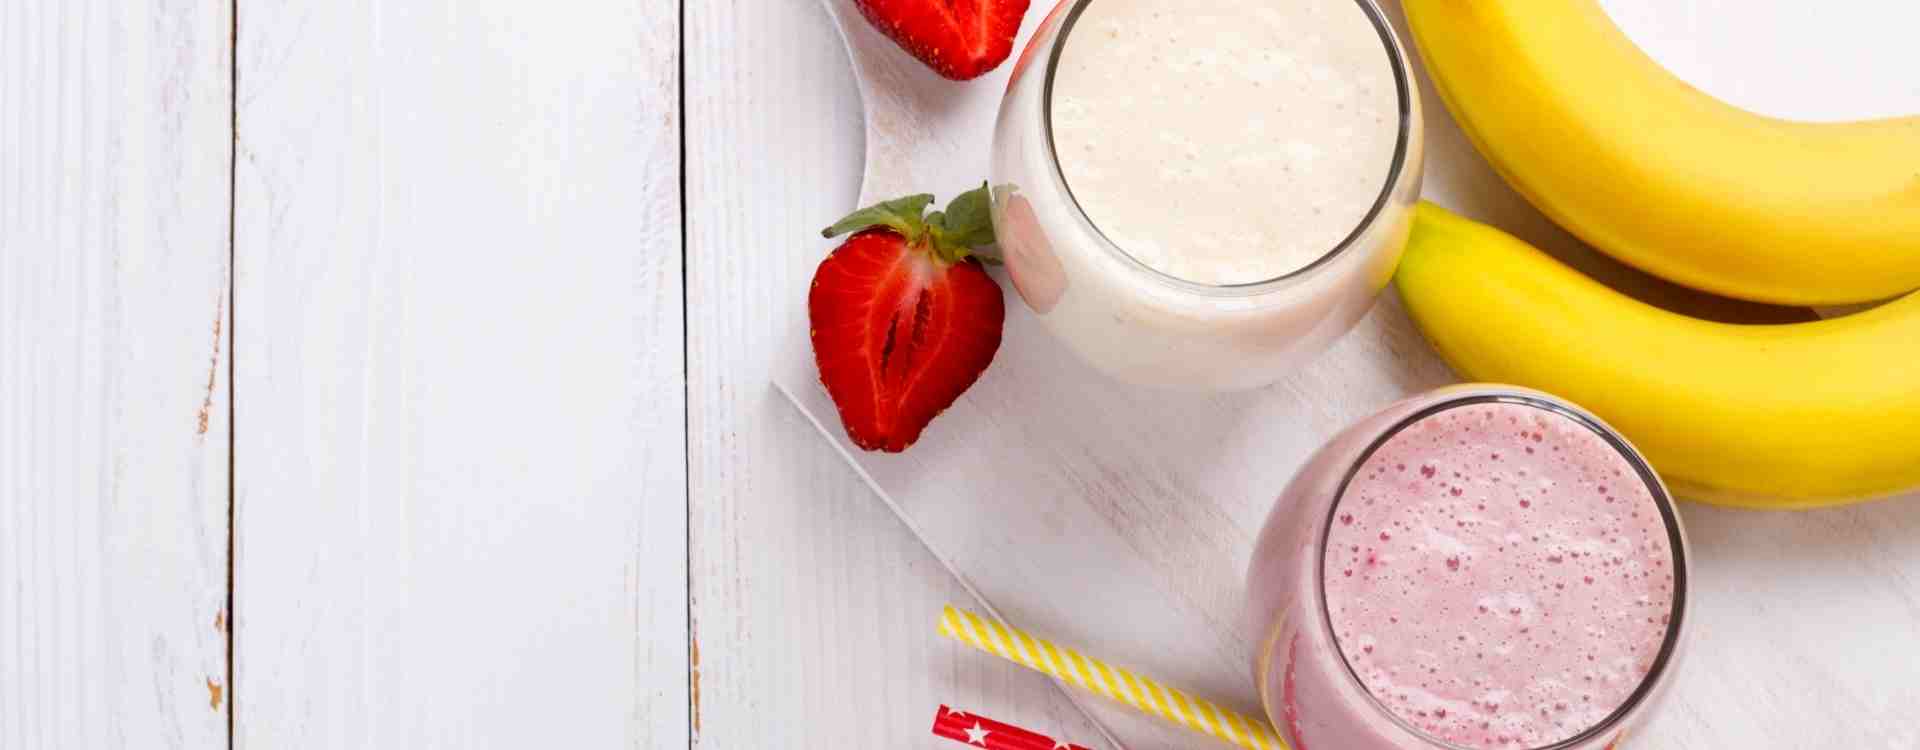 Strawberry and banana smoothies from a bird’s eye view